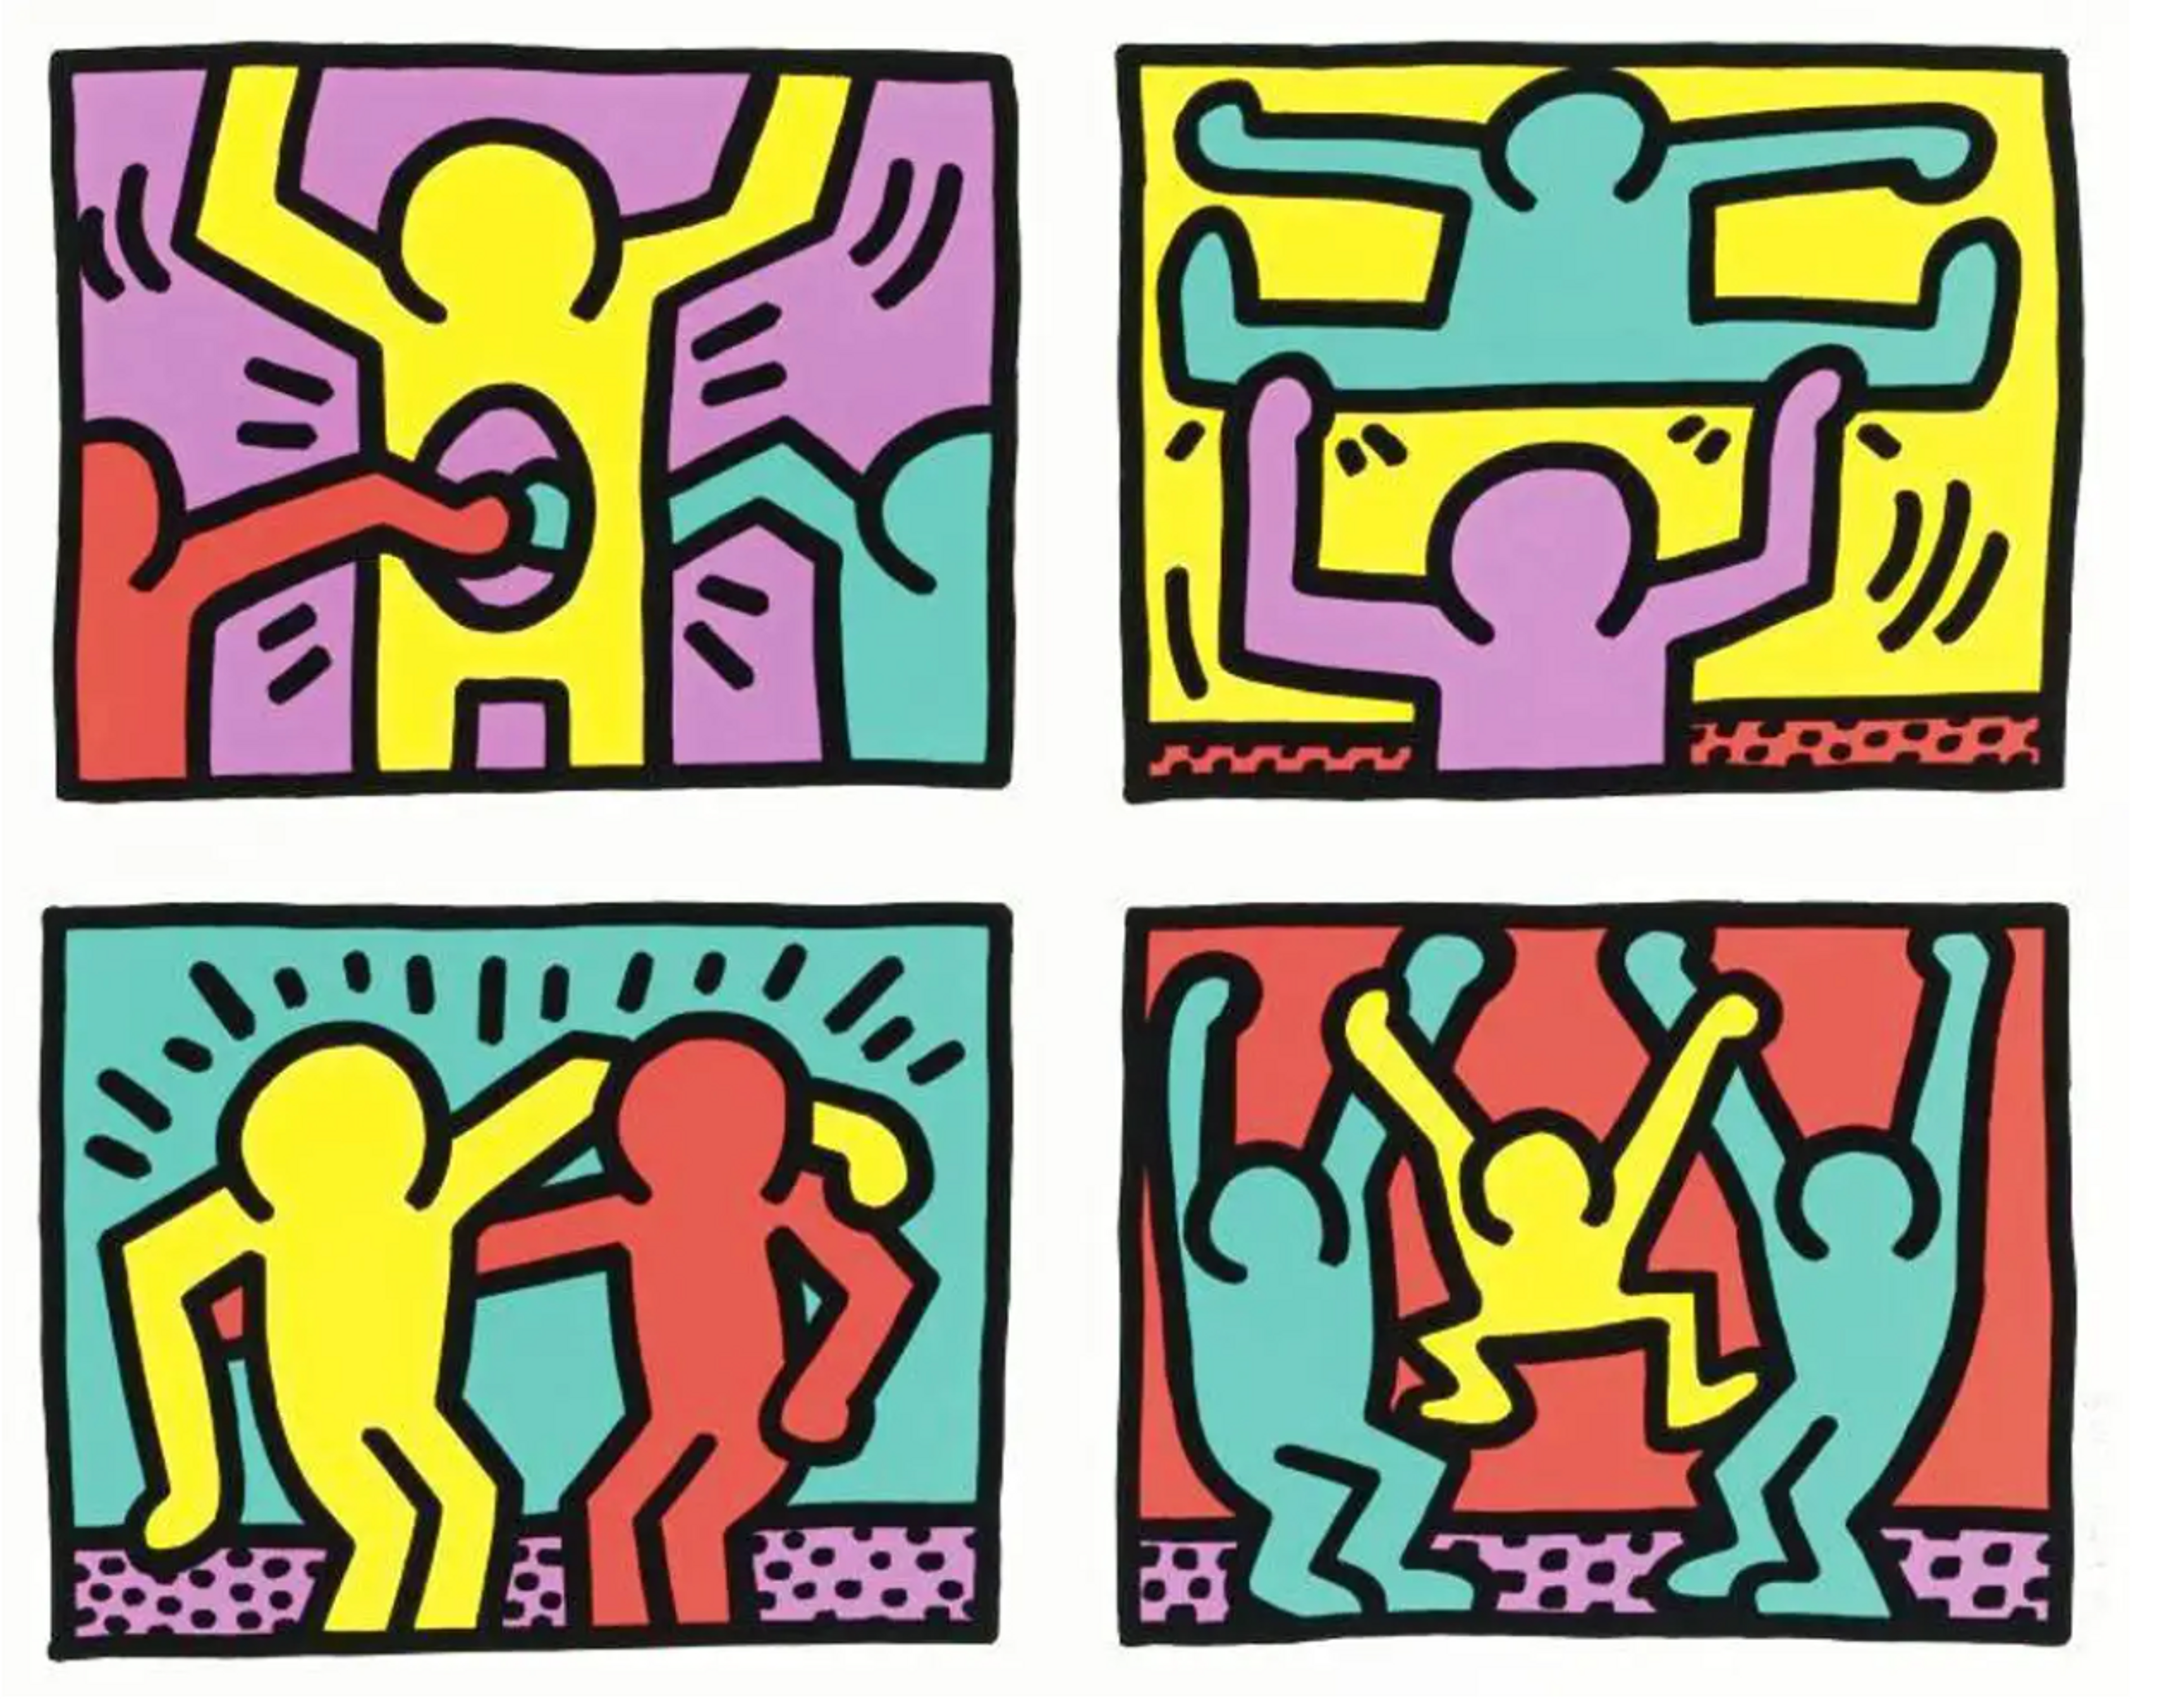 Pop Shop Quad 1 by Keith Haring